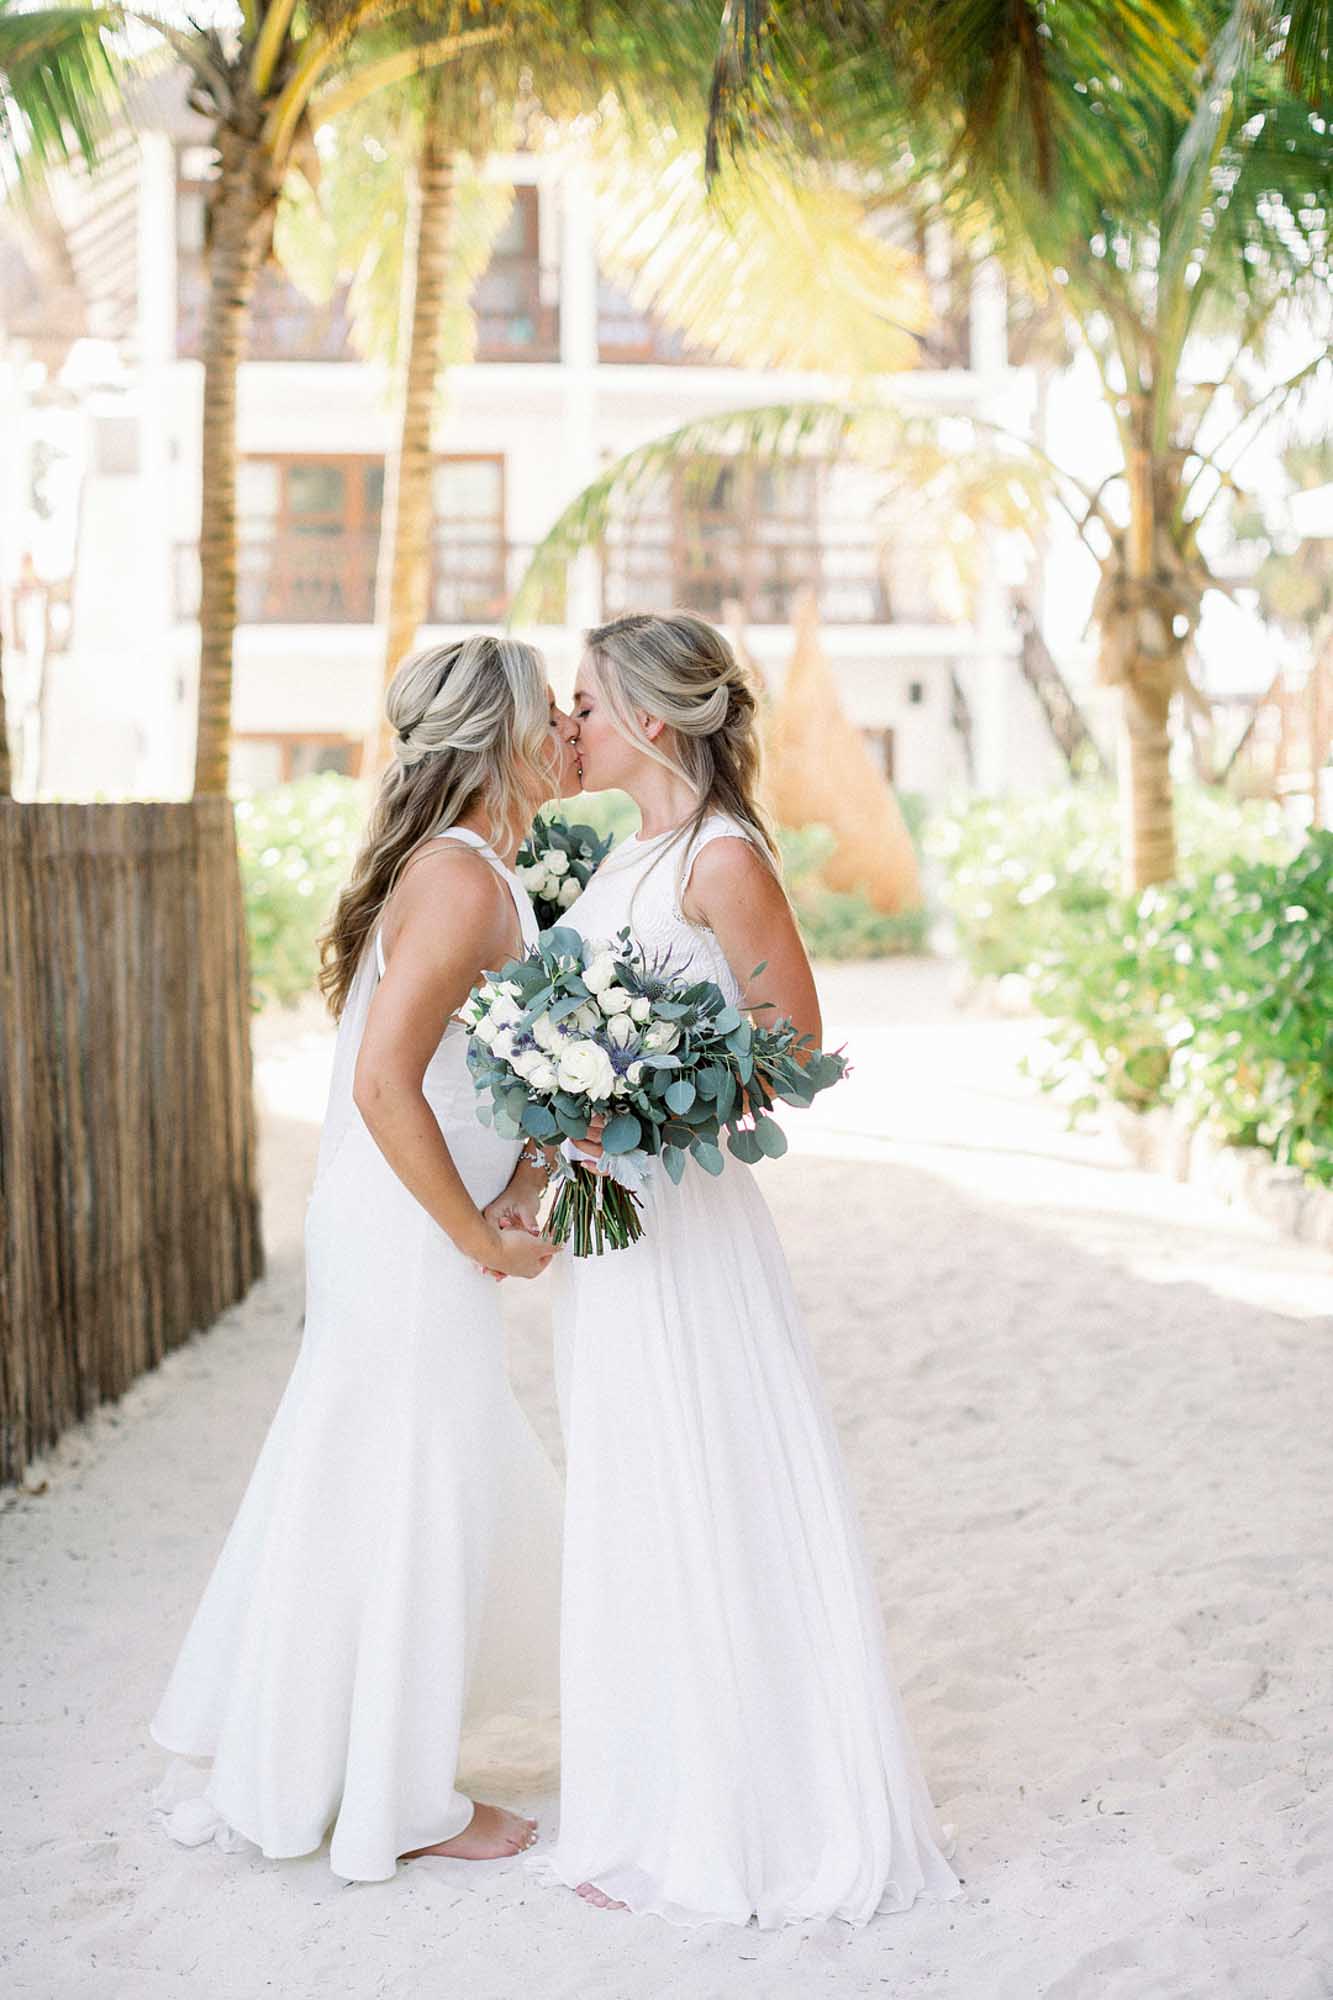 Shoes were optional at this casual Mexico wedding on the beach | Moni & Adri Weddings | Featured on Equally Wed, the leading LGBTQ+ wedding magazine